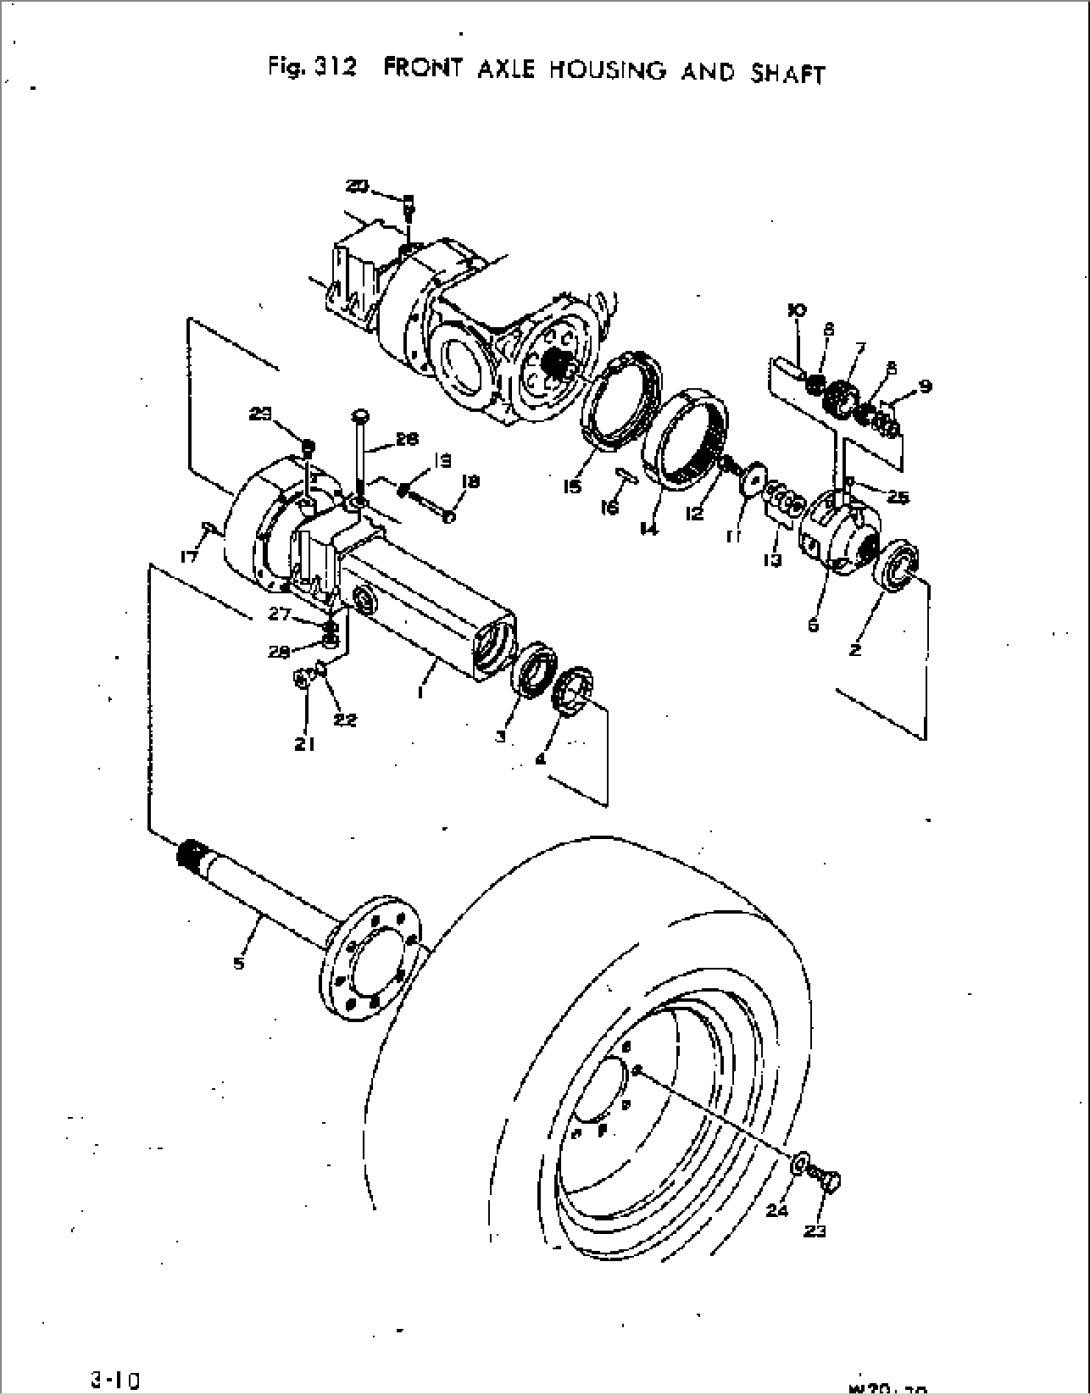 FRONT AXLE¤ HOUSING AND SHAFT